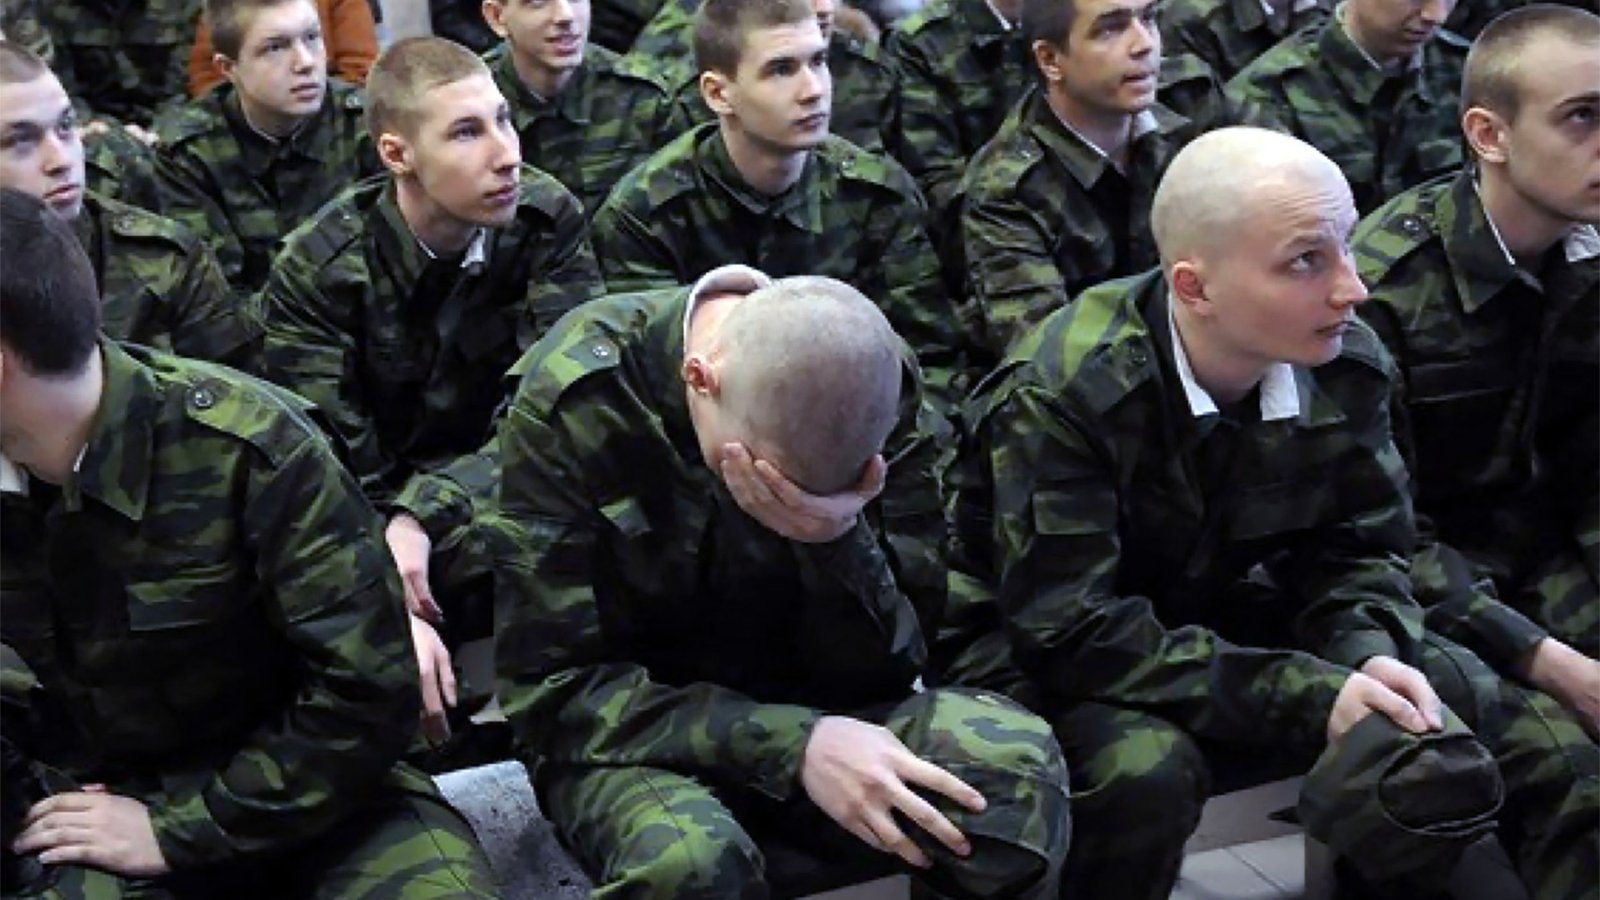 Putin ramps up forces with 150,000 Russians called up in highest-ever conscription drive amid fears of spring offensive